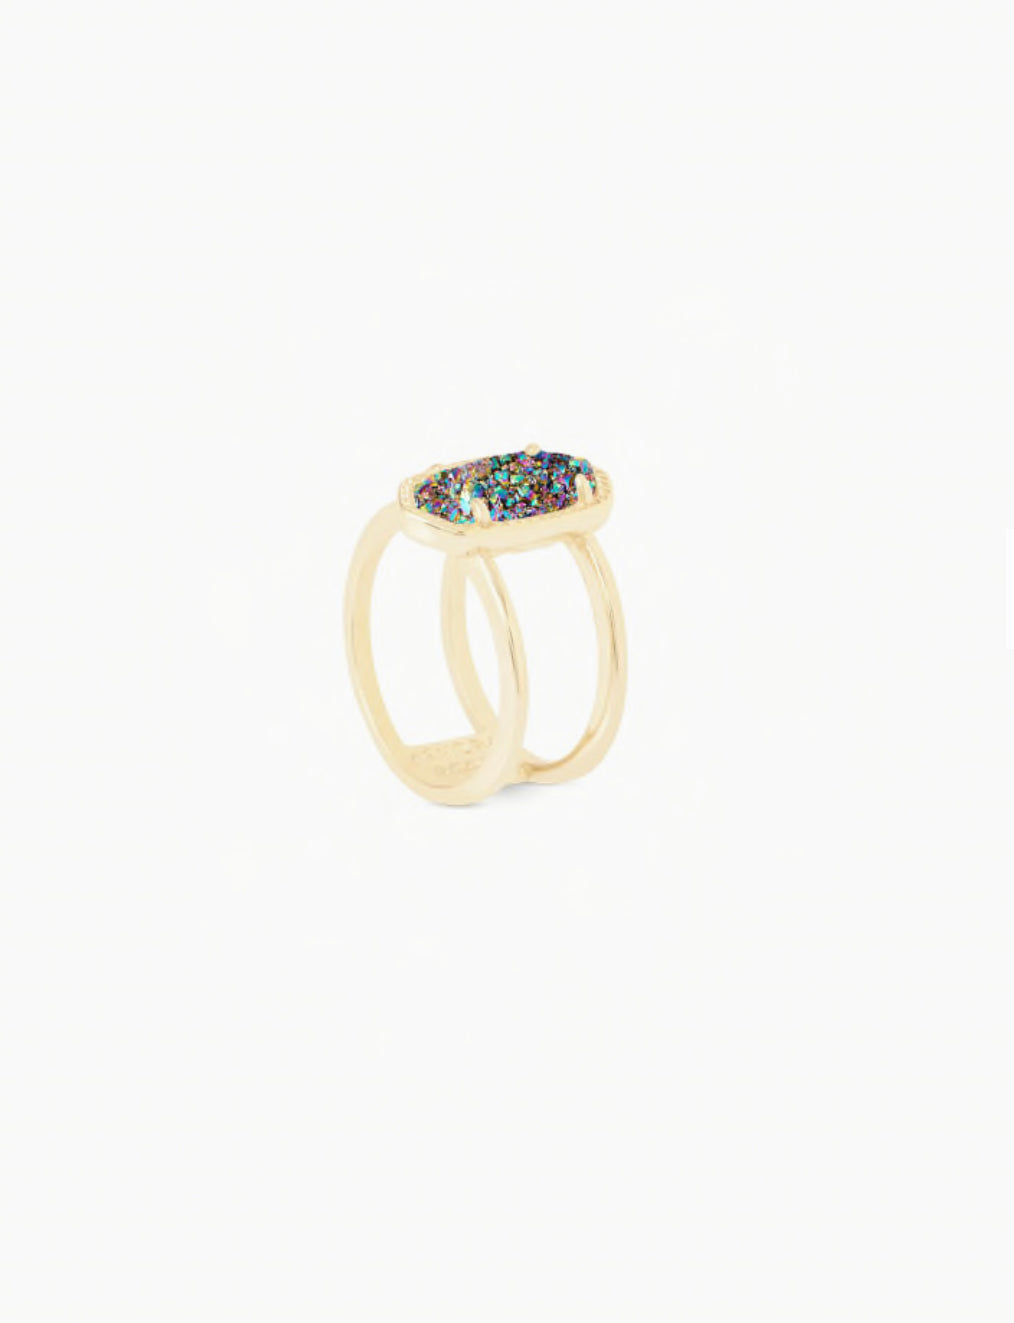 Elyse Gold Multicolor Drusy Ring